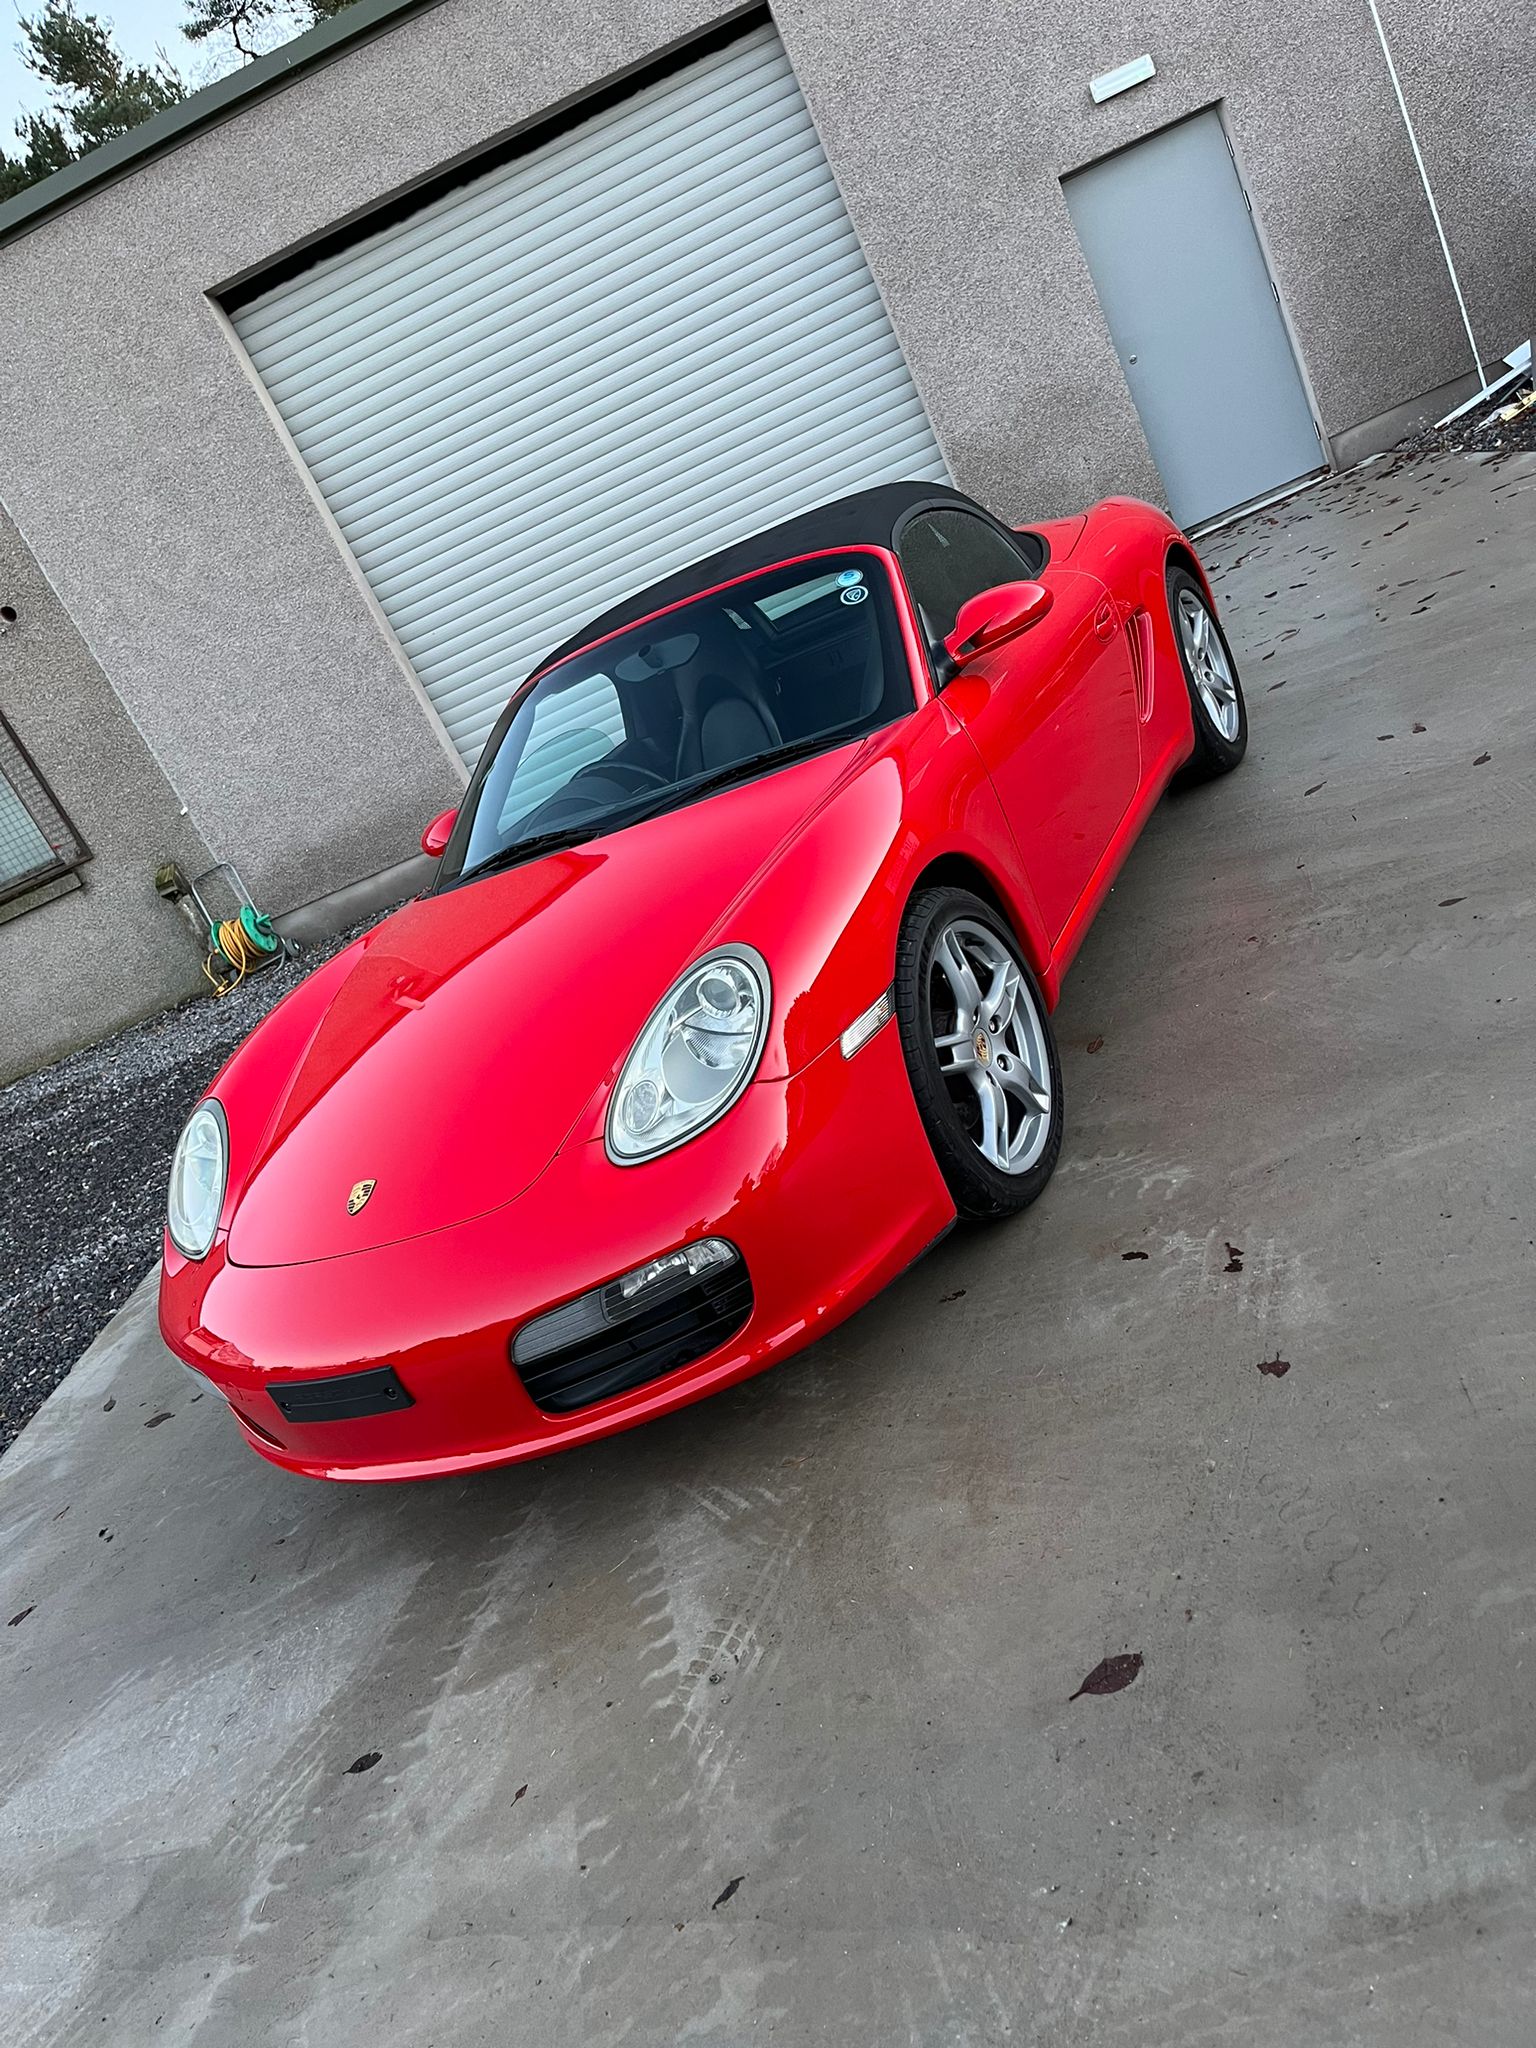 2005 Porsche Boxster 987 2.7 - Page 8 - Readers' Cars - PistonHeads UK